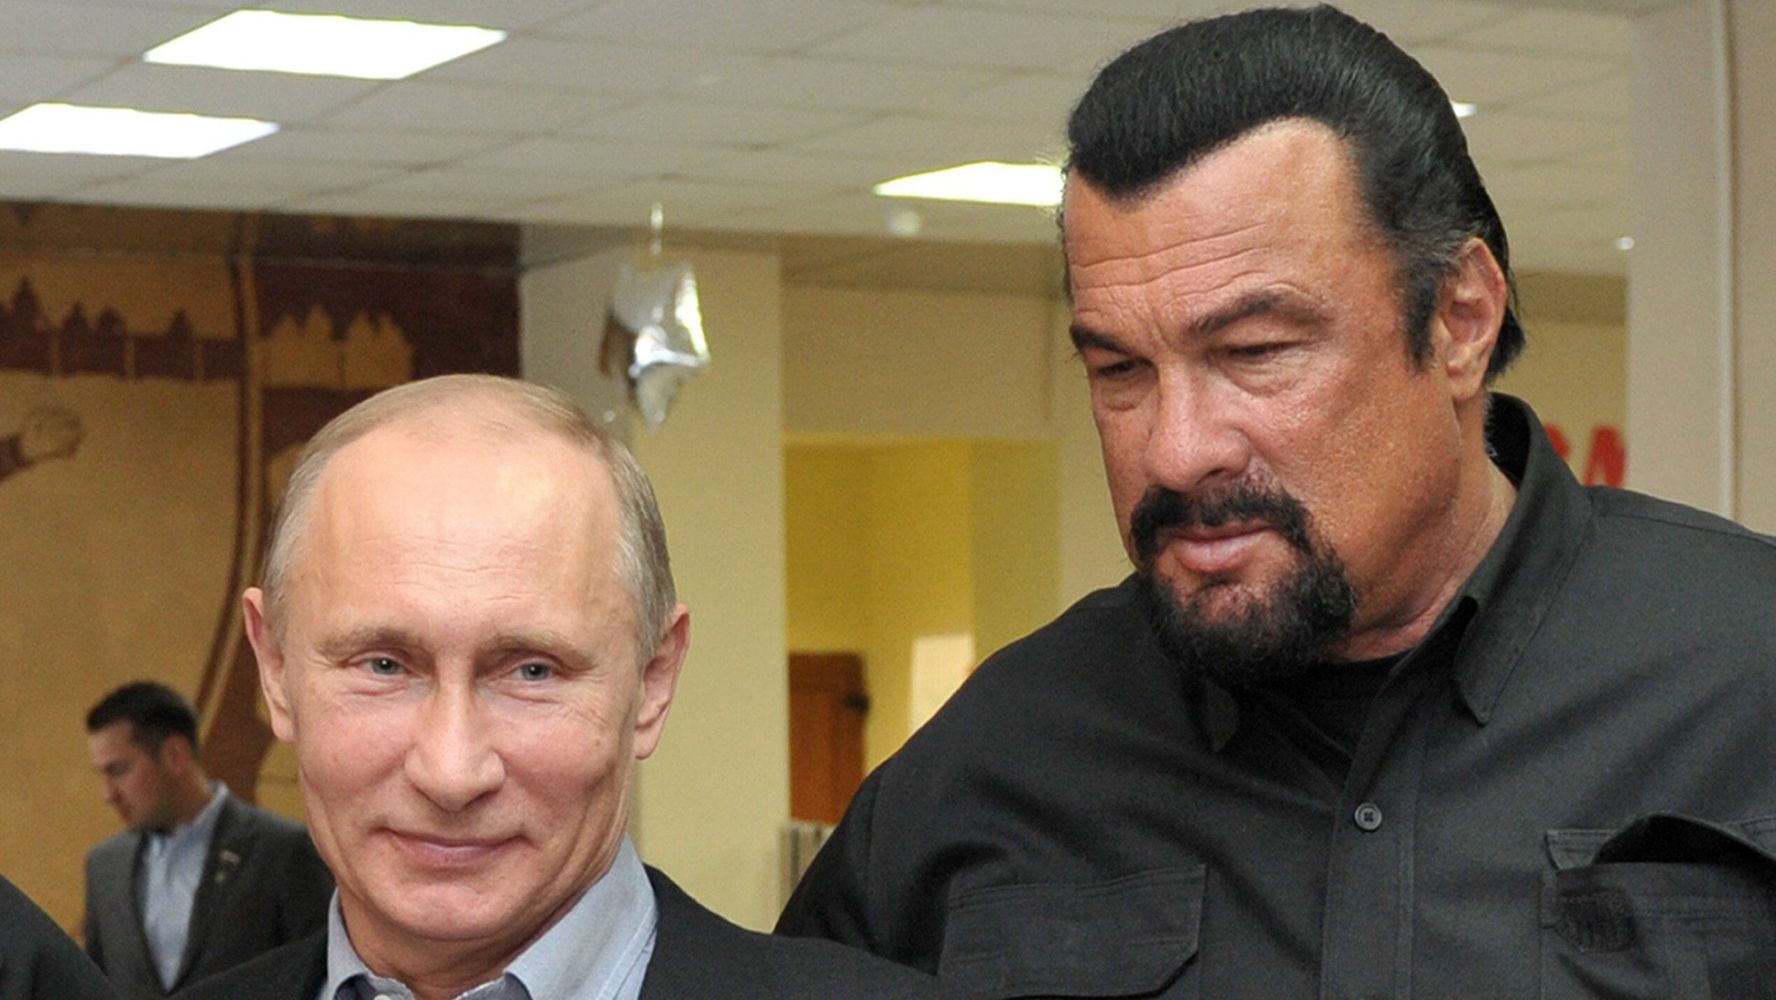 Steven Seagal Joins Pro-Putin Political Party In Russia